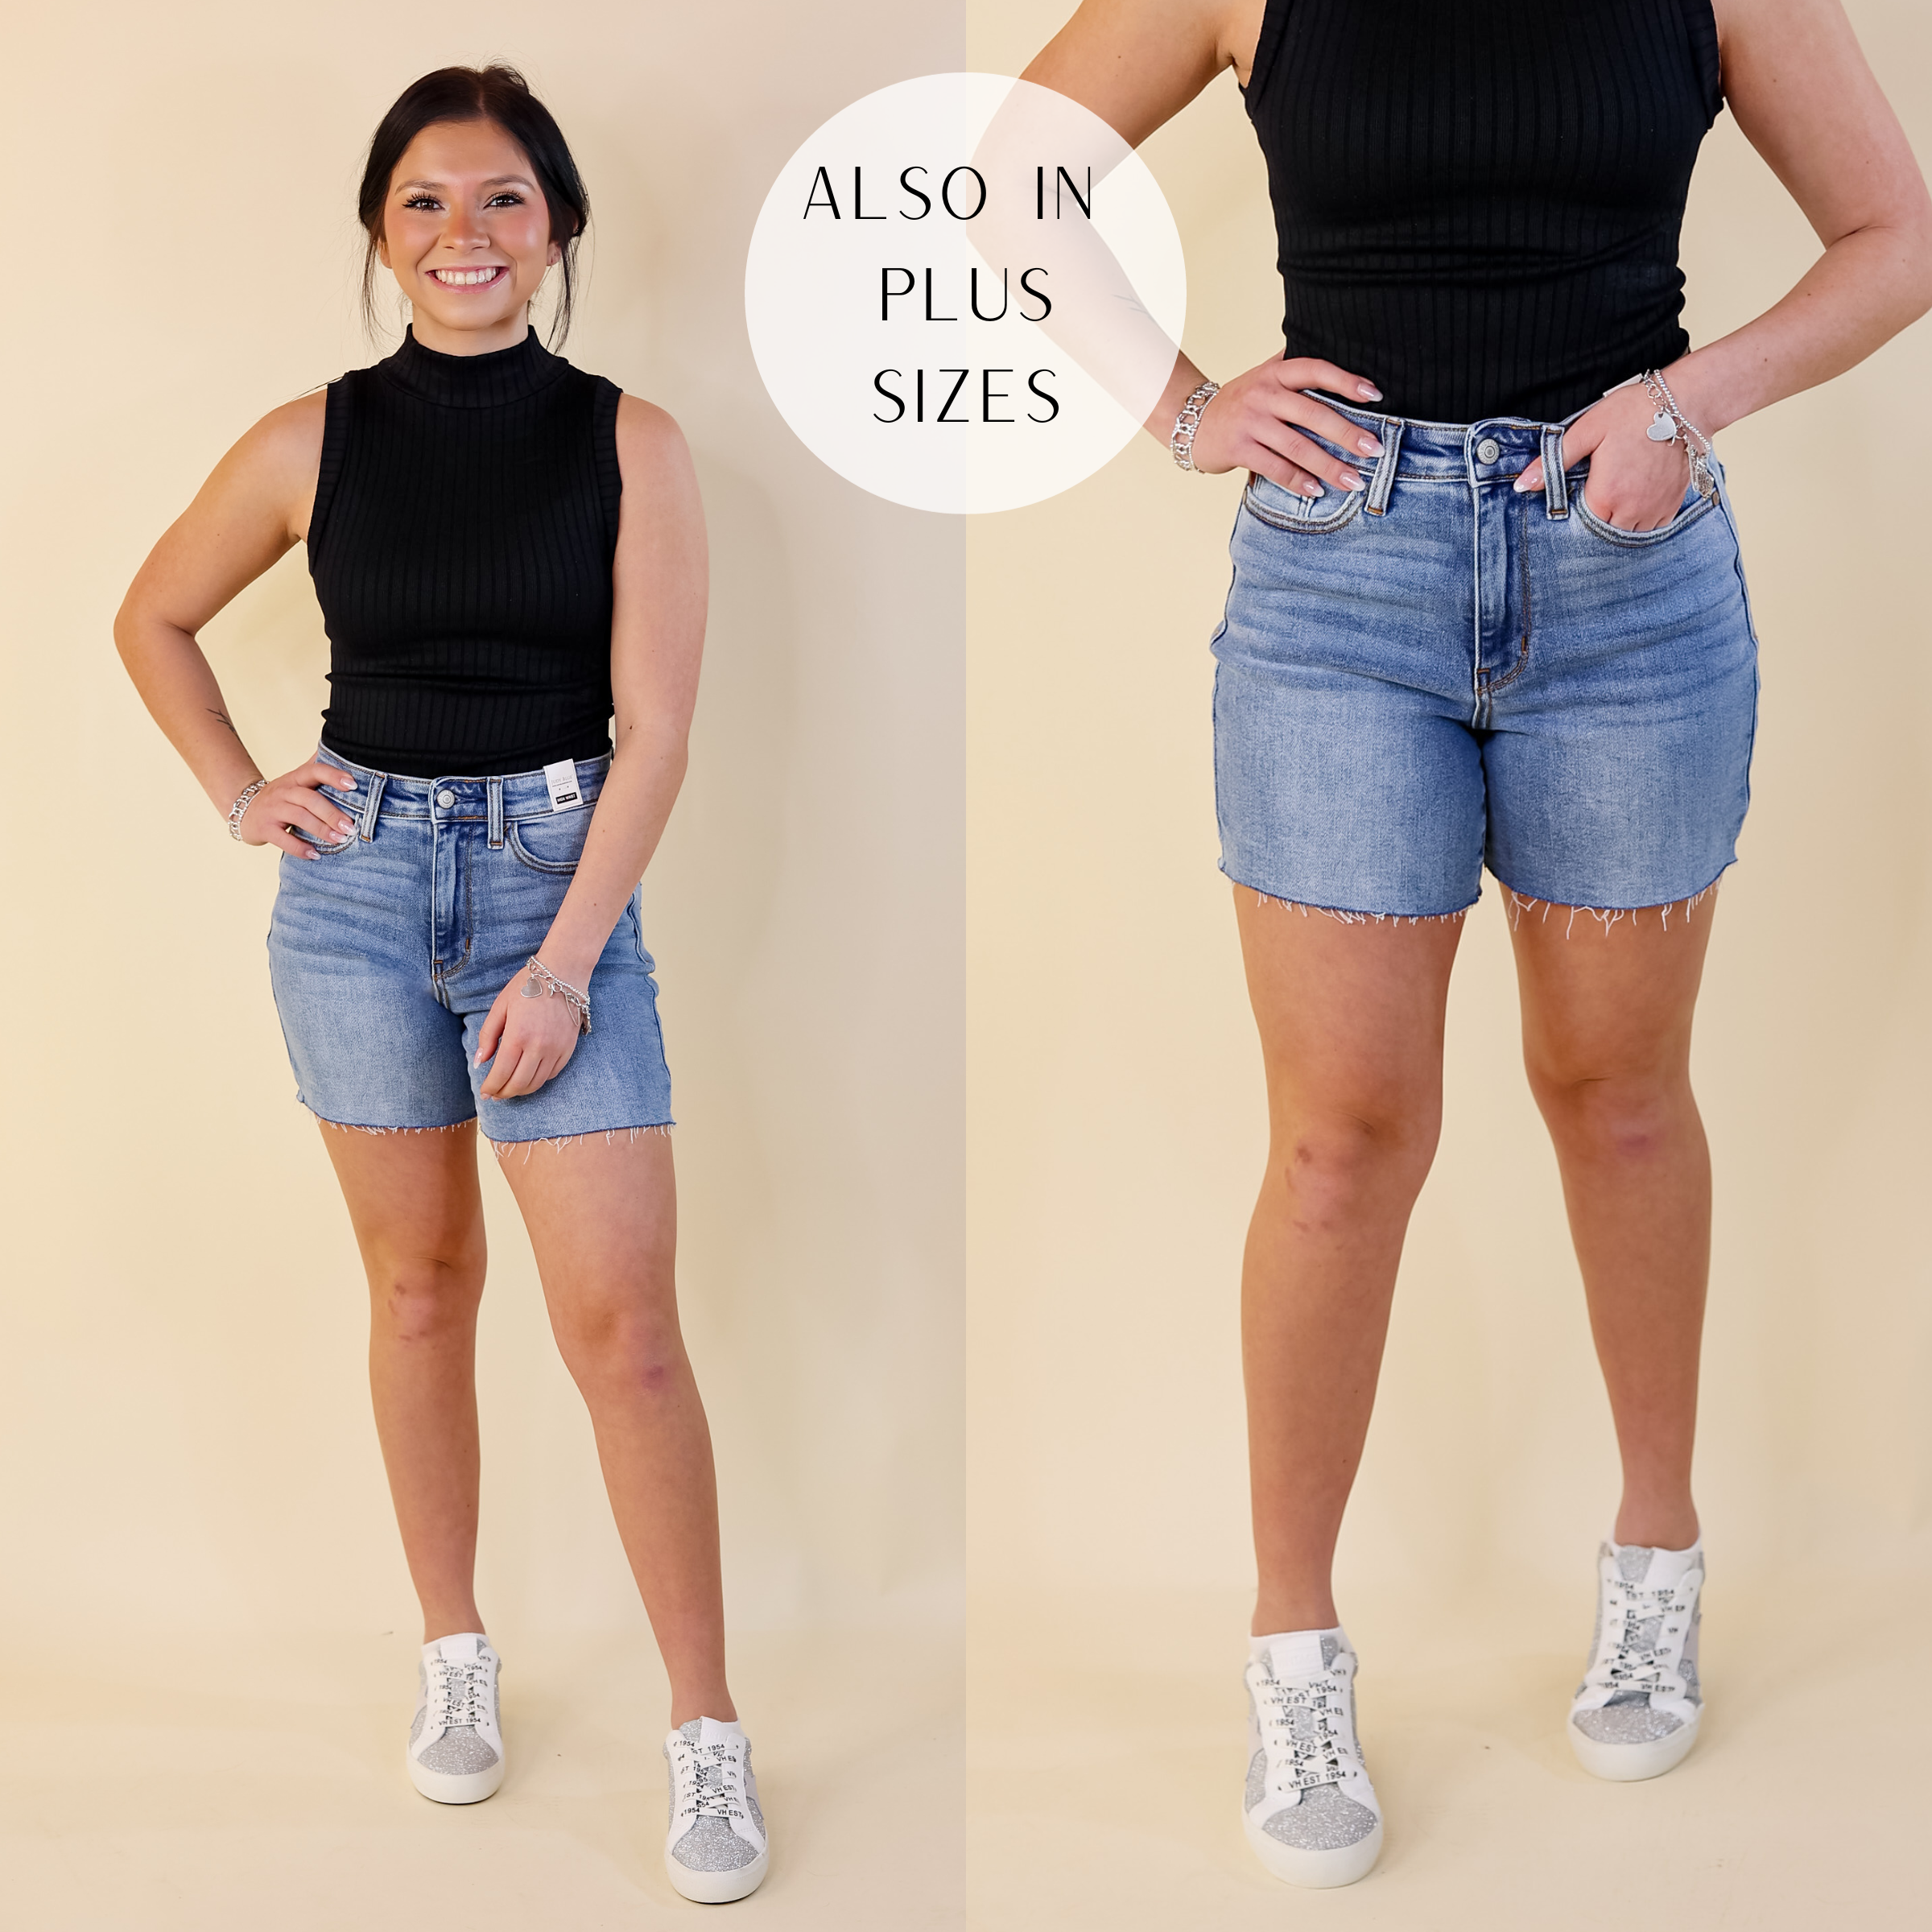 Judy Blue | Street Style Mid Thigh Shorts in Light Wash - Giddy Up Glamour Boutique